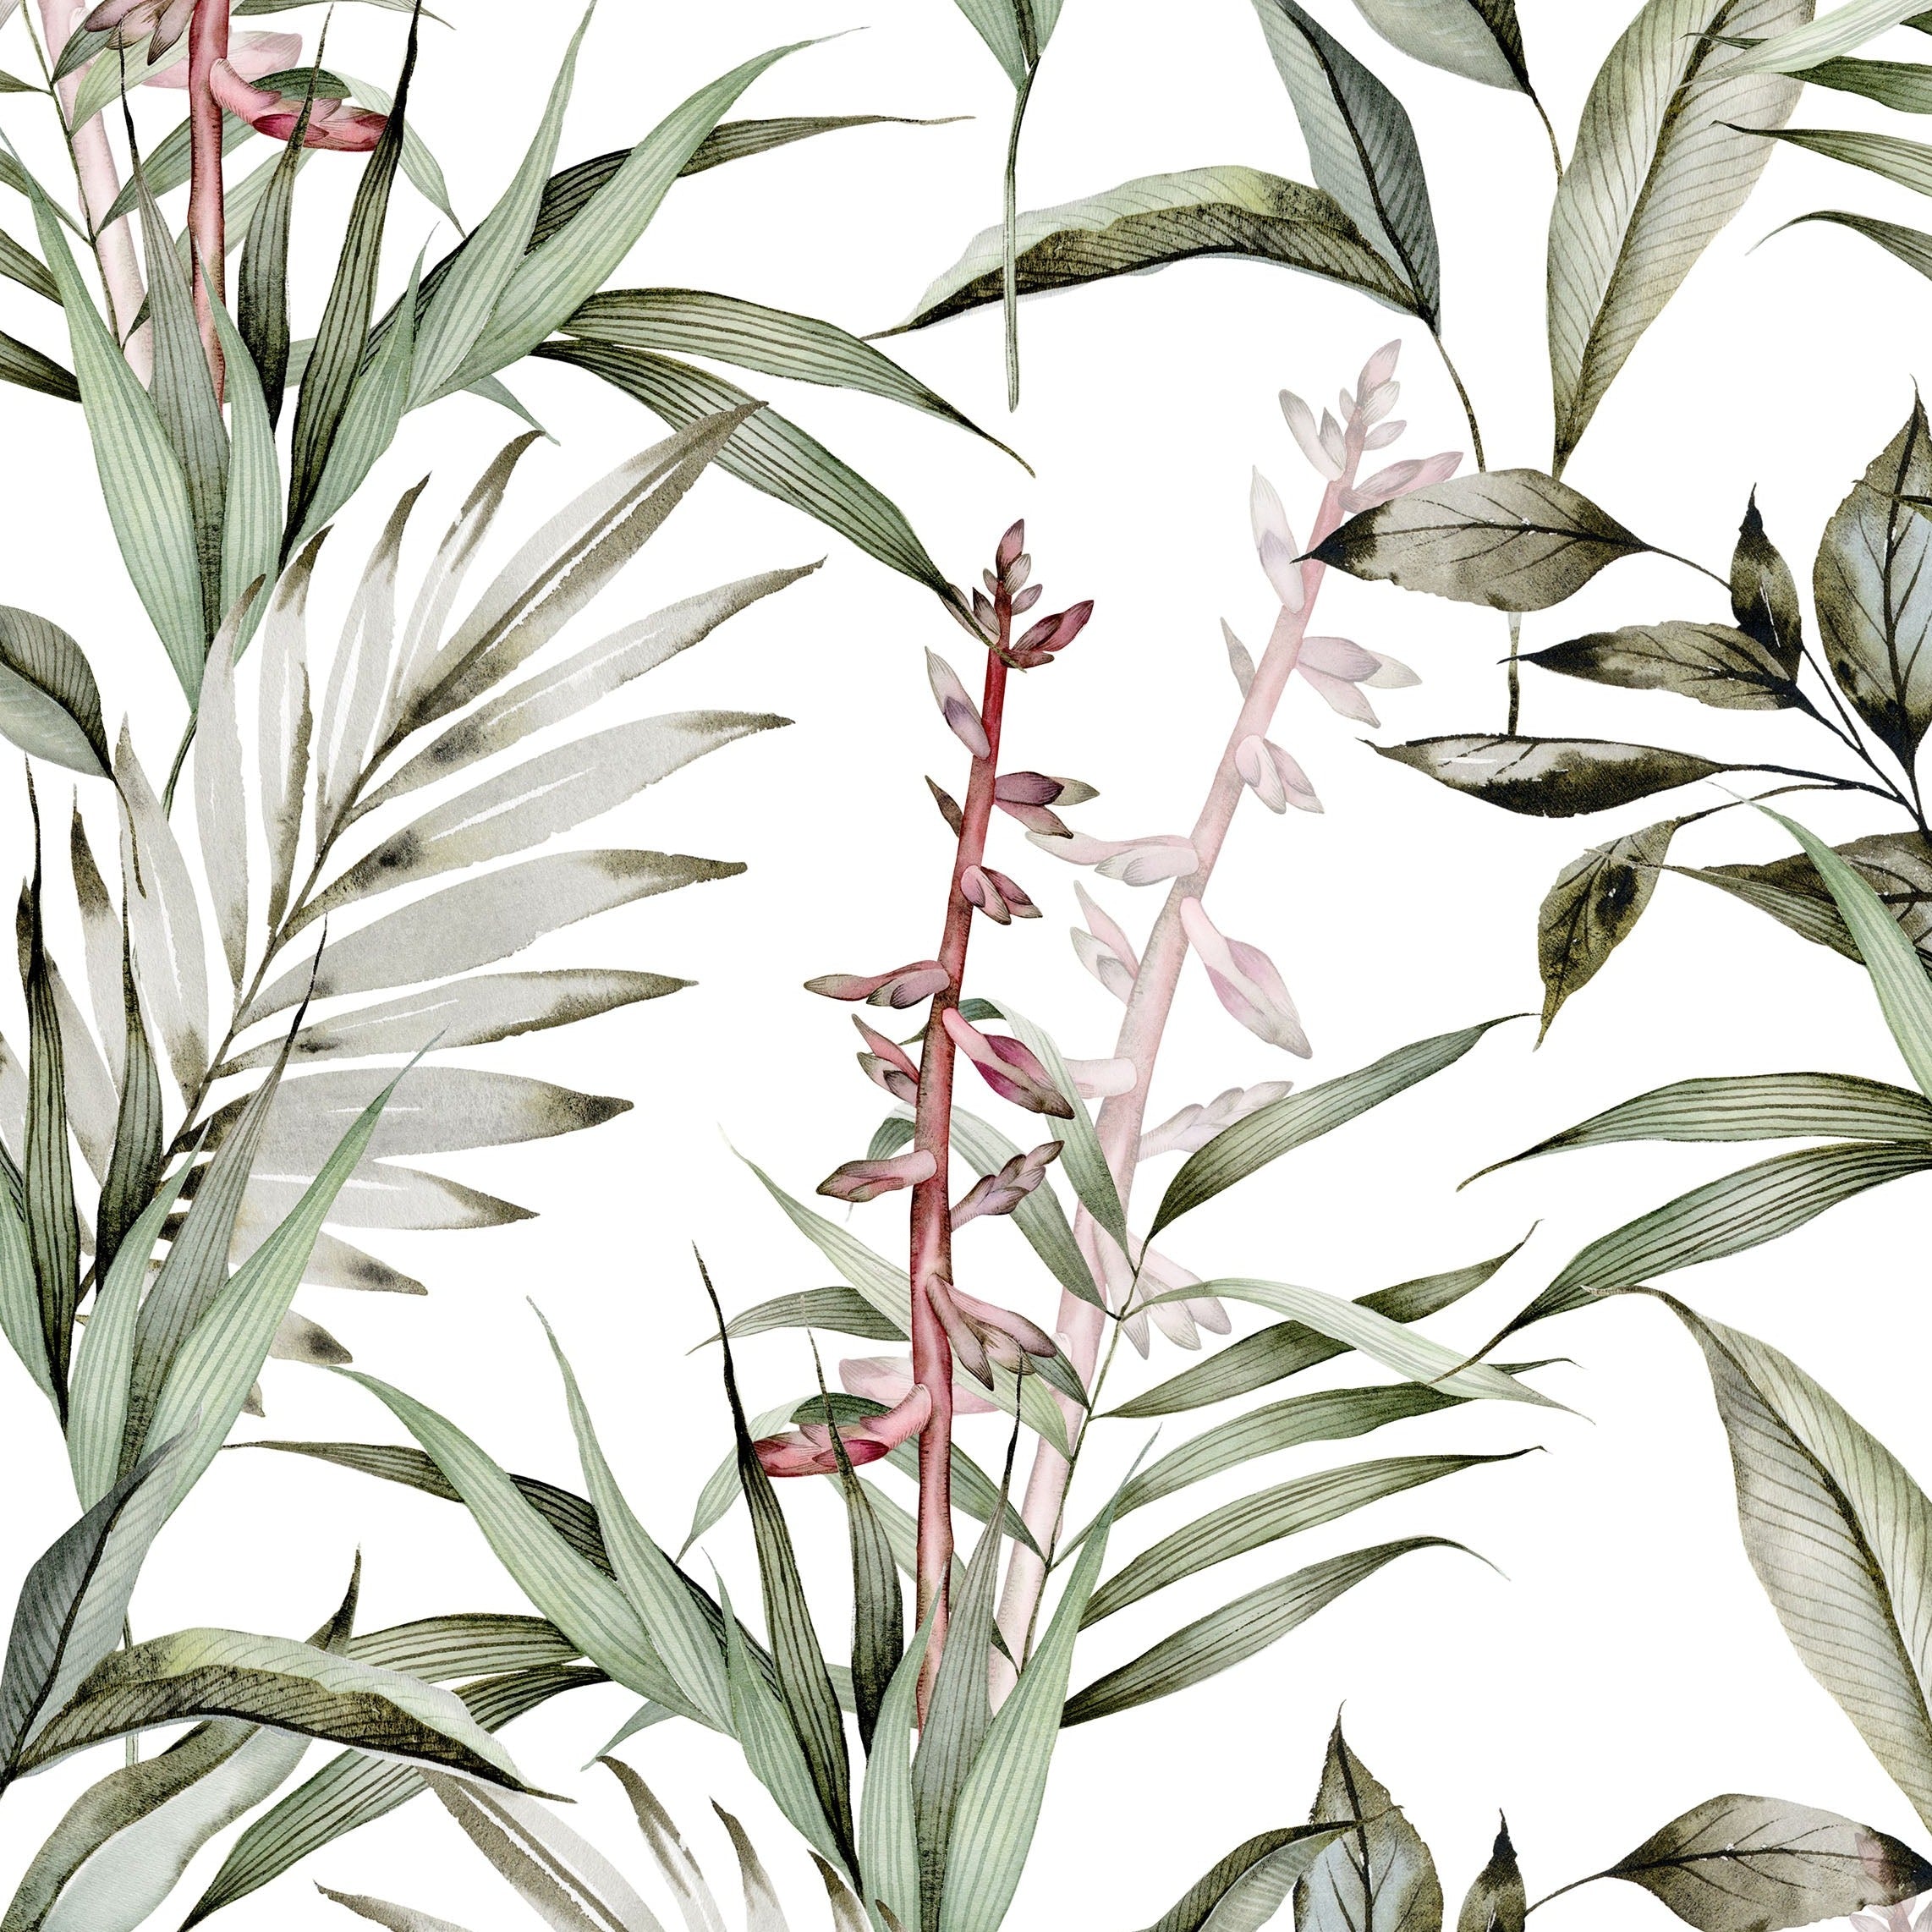 A close-up view of tropical branches wallpaper showcasing an intricate pattern of green leaves and pinkish-red flowers on a light background. The detailed design and natural colors create a lush and refreshing look, perfect for adding a touch of nature to any room.